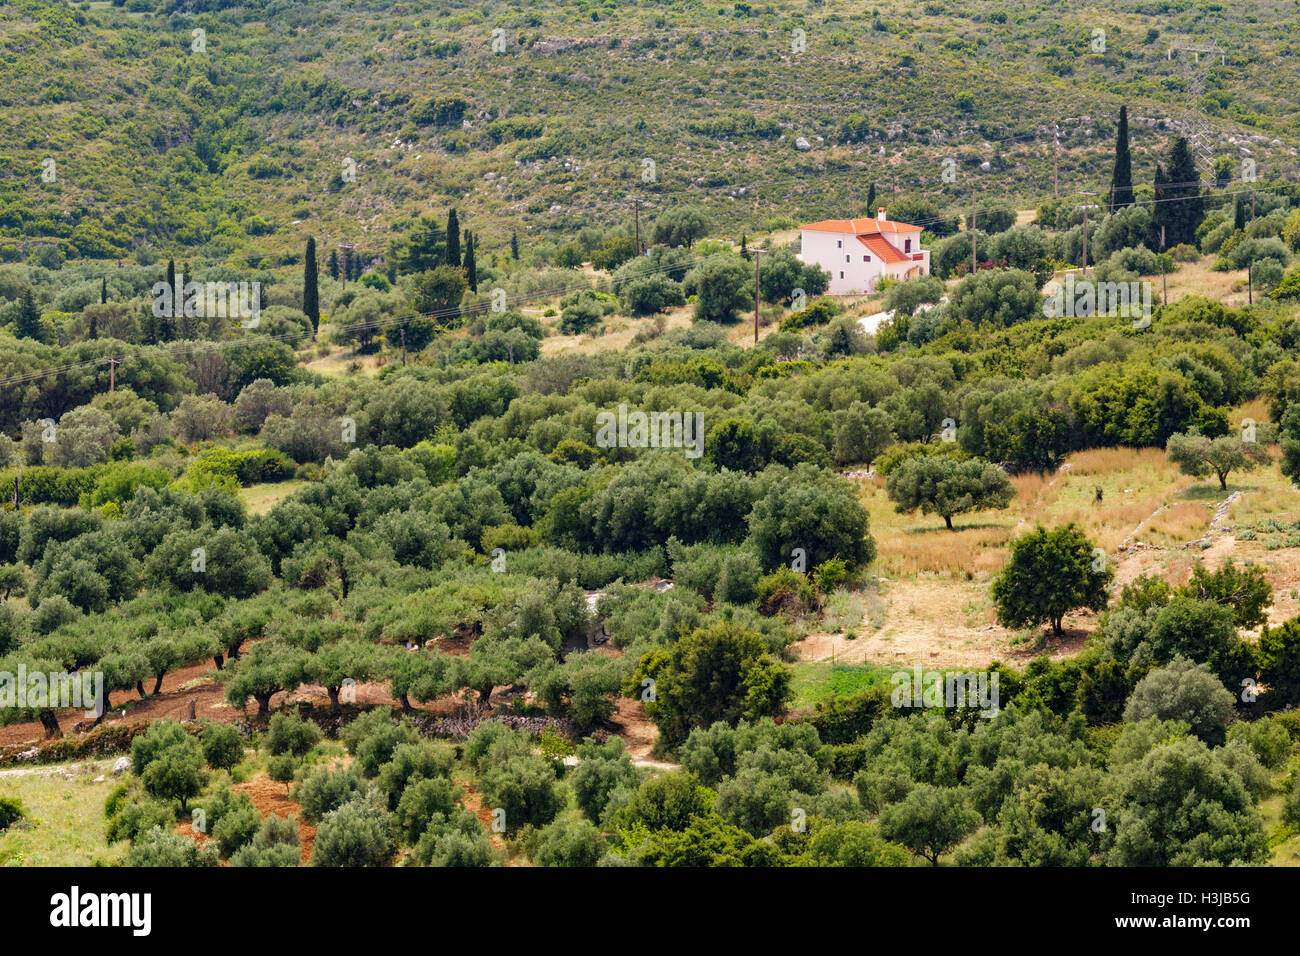 A Greek Villa stands on the mountain side surrounded by a landscape of green Olive trees in Kefalonia, Greece. Stock Photo